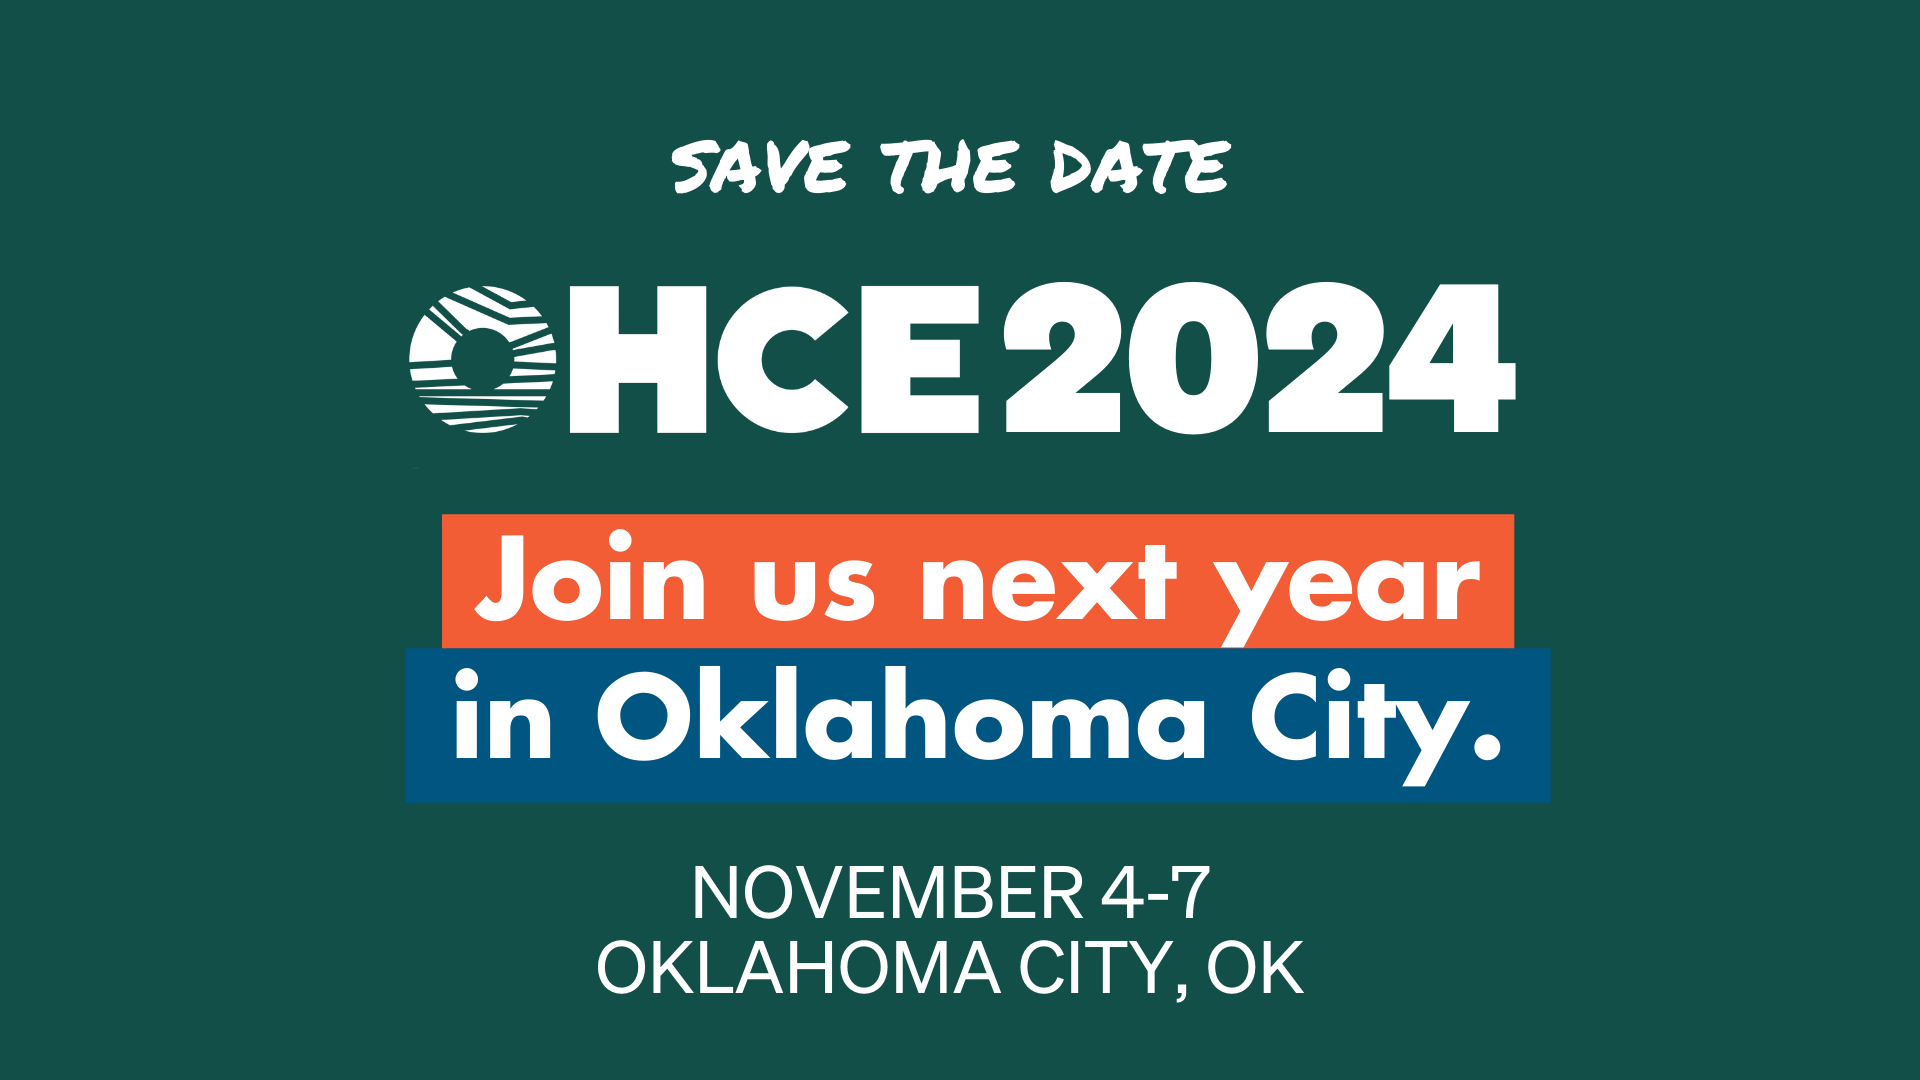 OHCE2024 save the date november 4-7